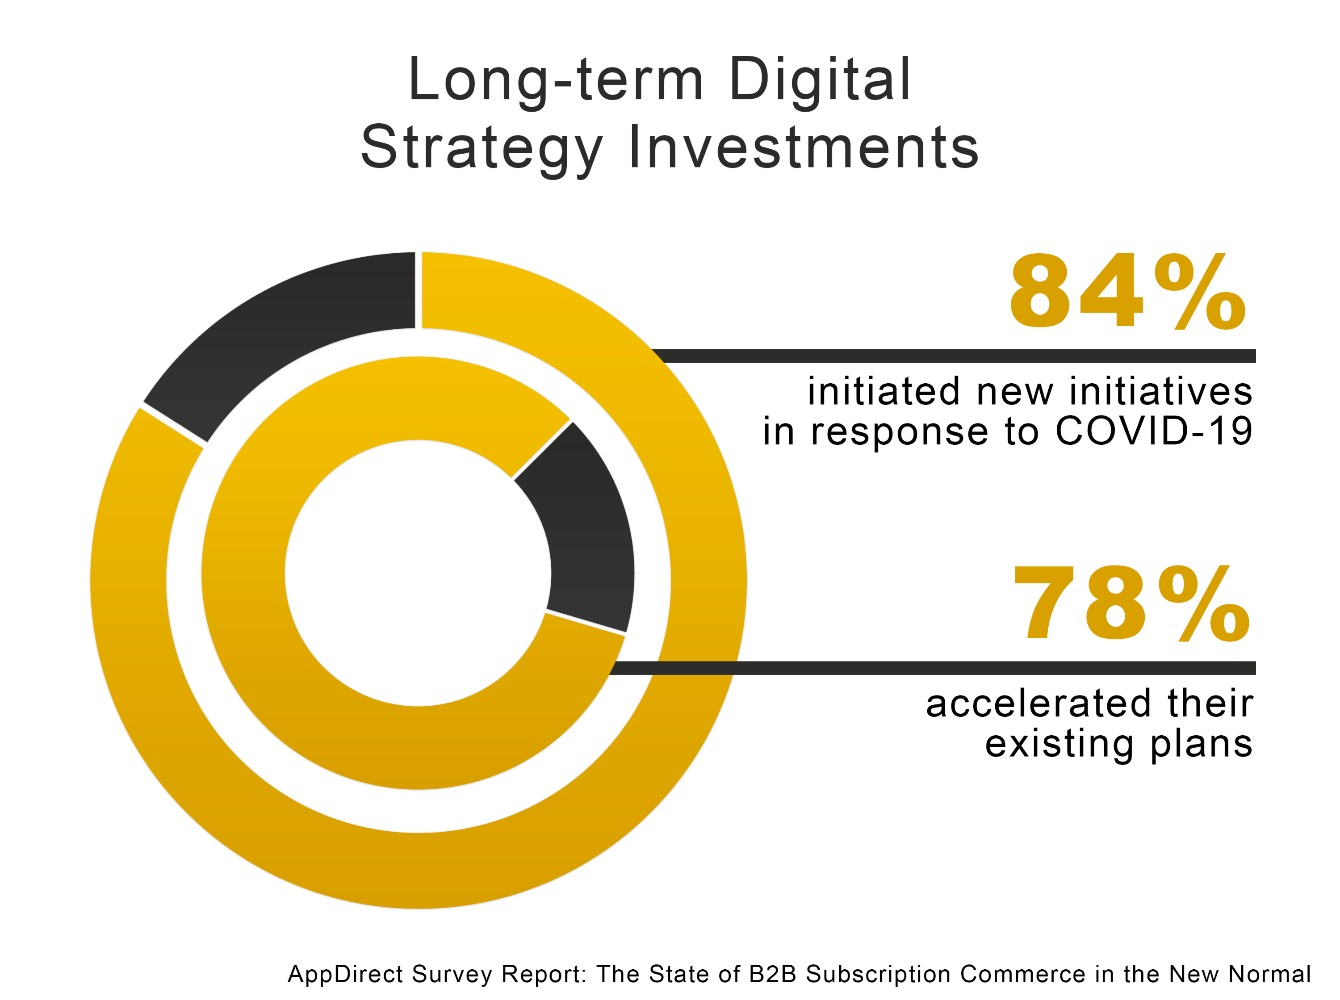 Long-term Digital Strategy Investments